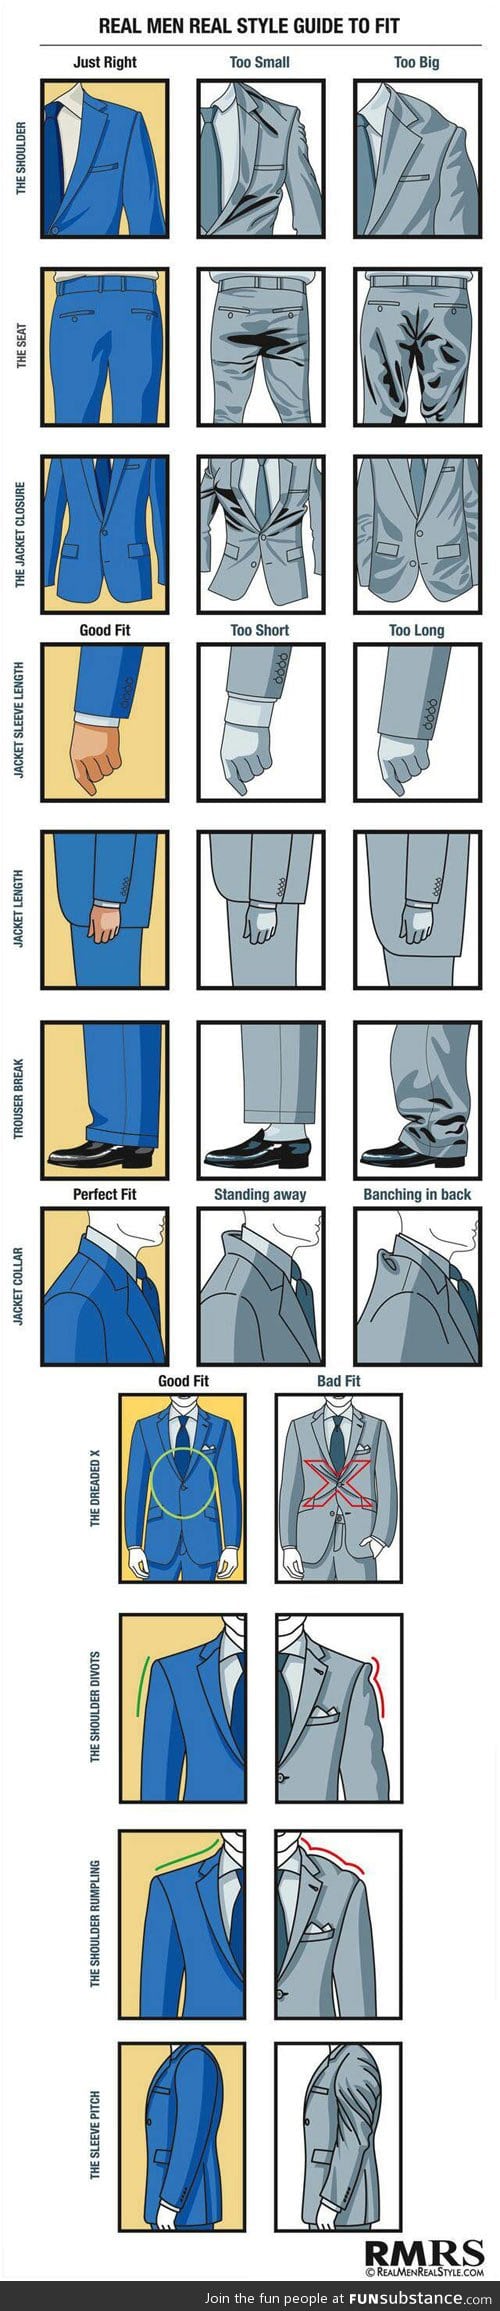 Men's guide to proper fitting of suits